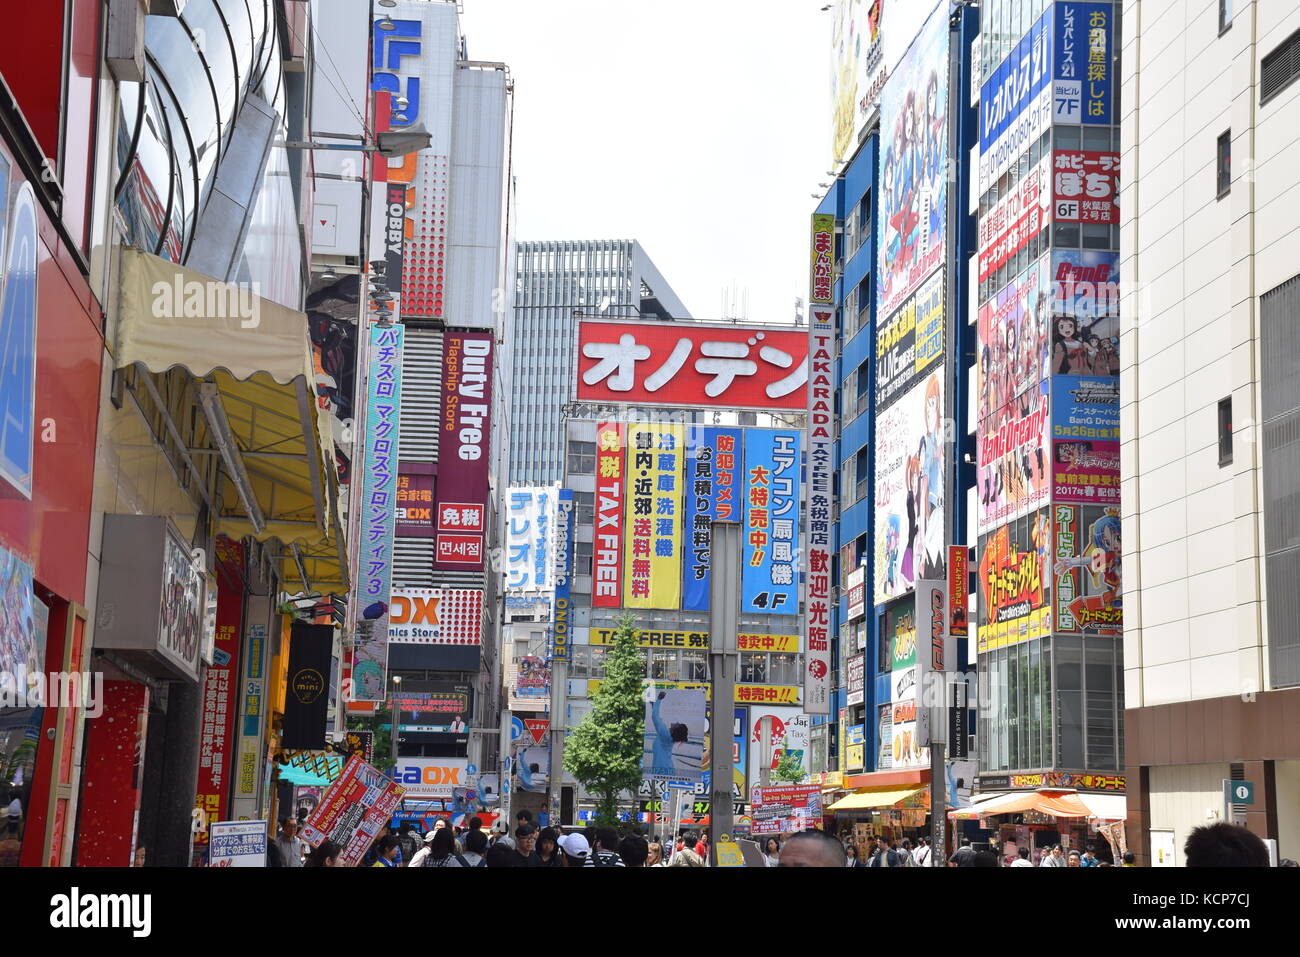 Colorful advertisements on the buildings in Akihabara, famous district for electronic and manga shops in Tokyo, Japan Stock Photo